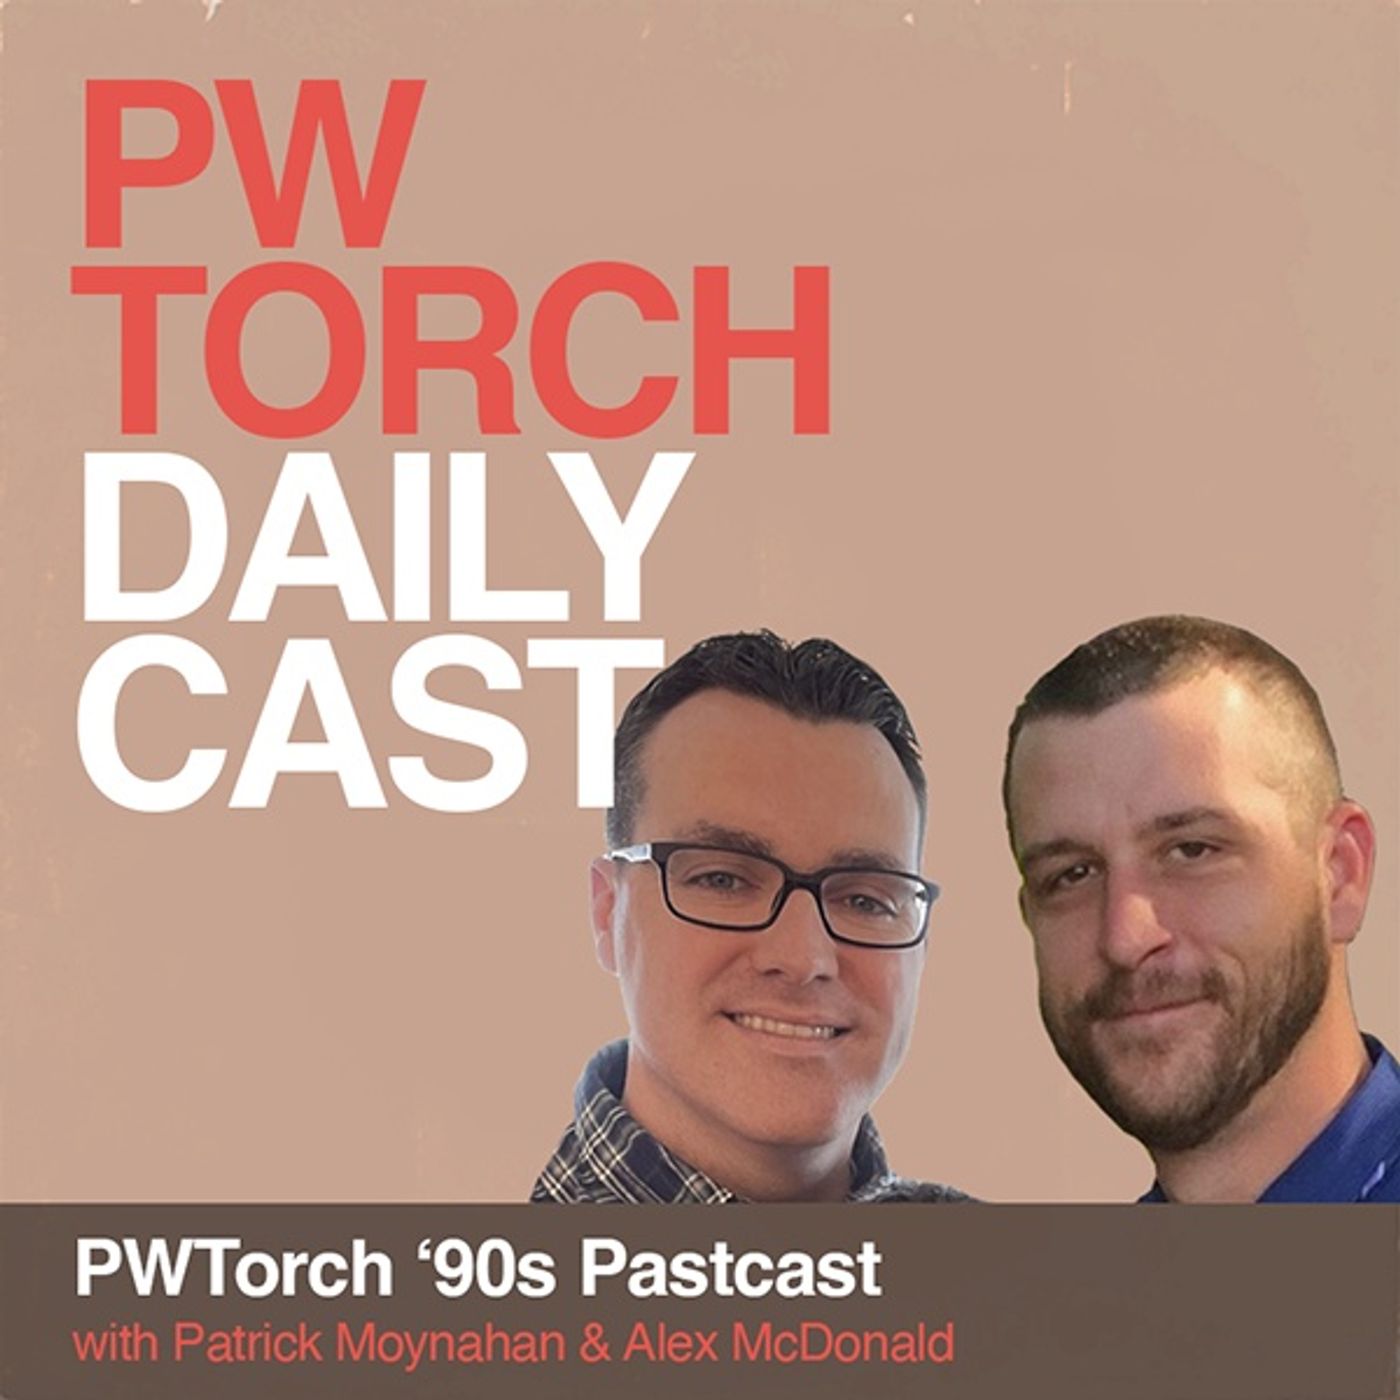 PWTorch Dailycast – PWTorch ‘90s Pastcast - Moynahan & McDonald discuss issue #223 (4-13-93) of the PWTorch incl. NWA Grandslam ‘93, more